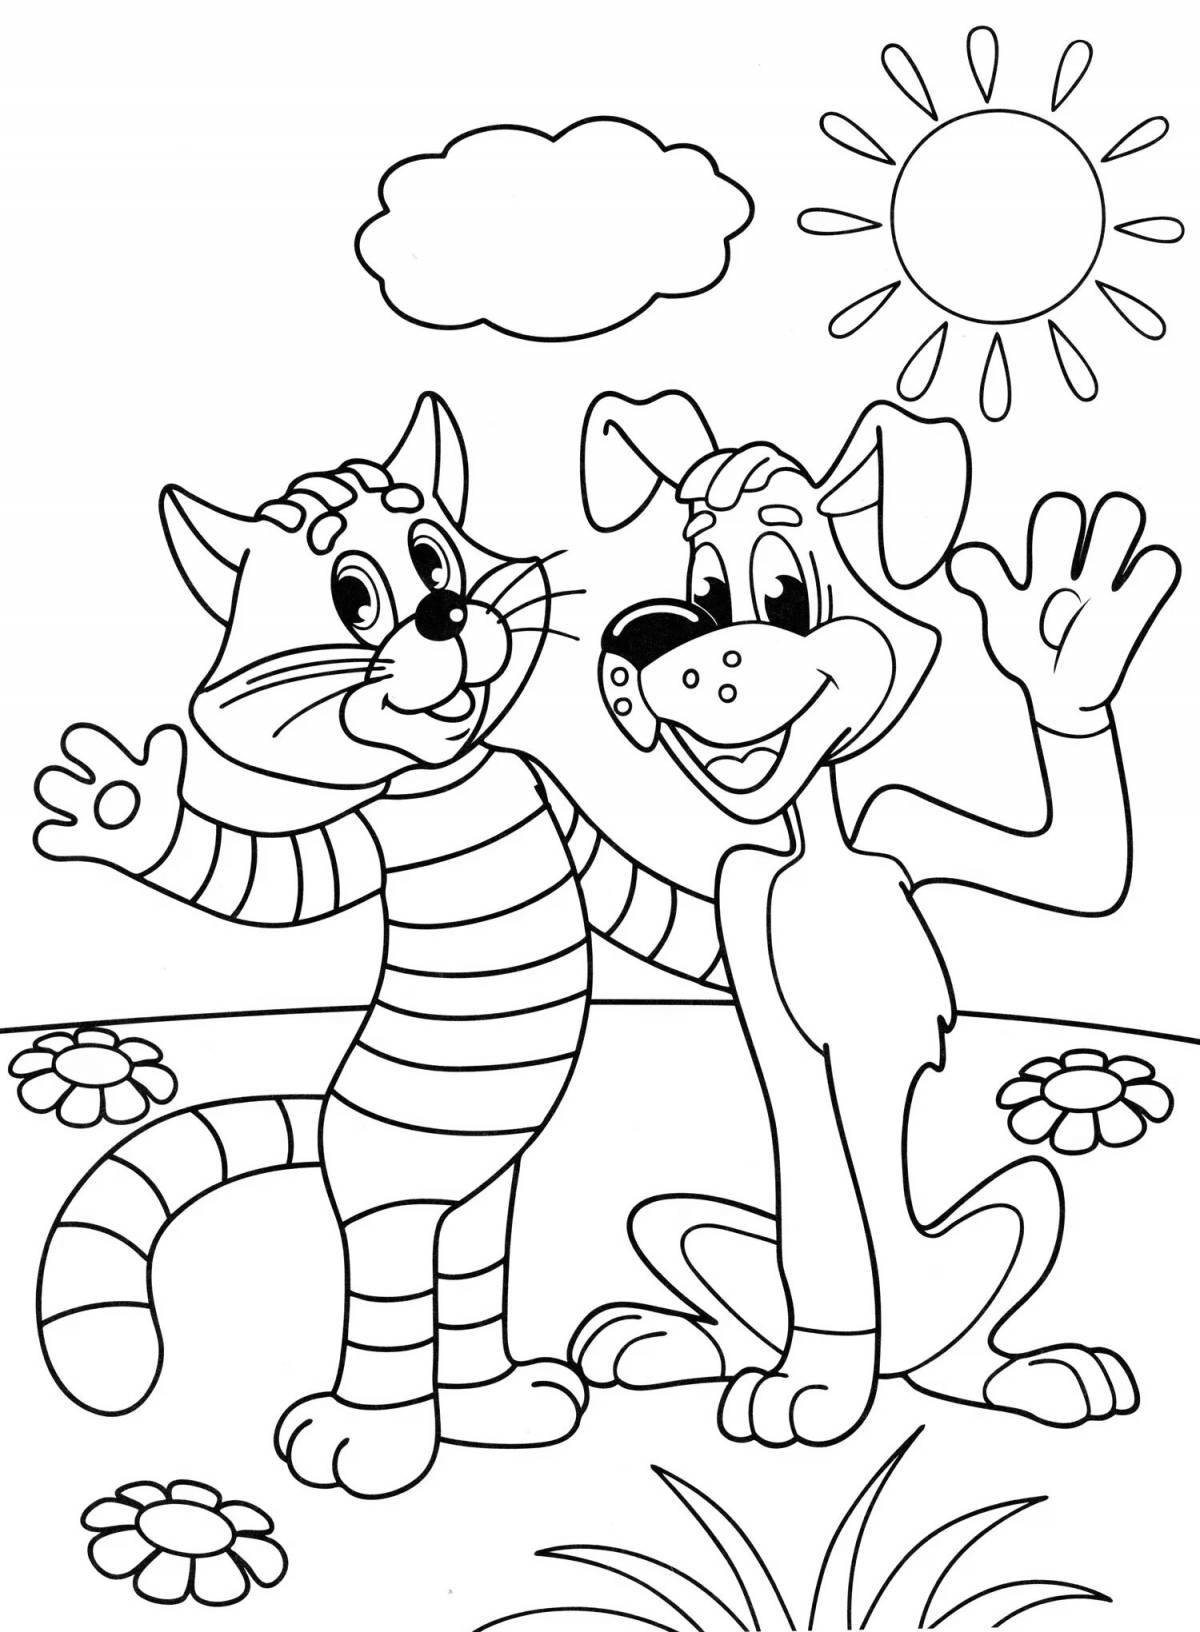 Charming dog and cat uncle fyodor coloring book